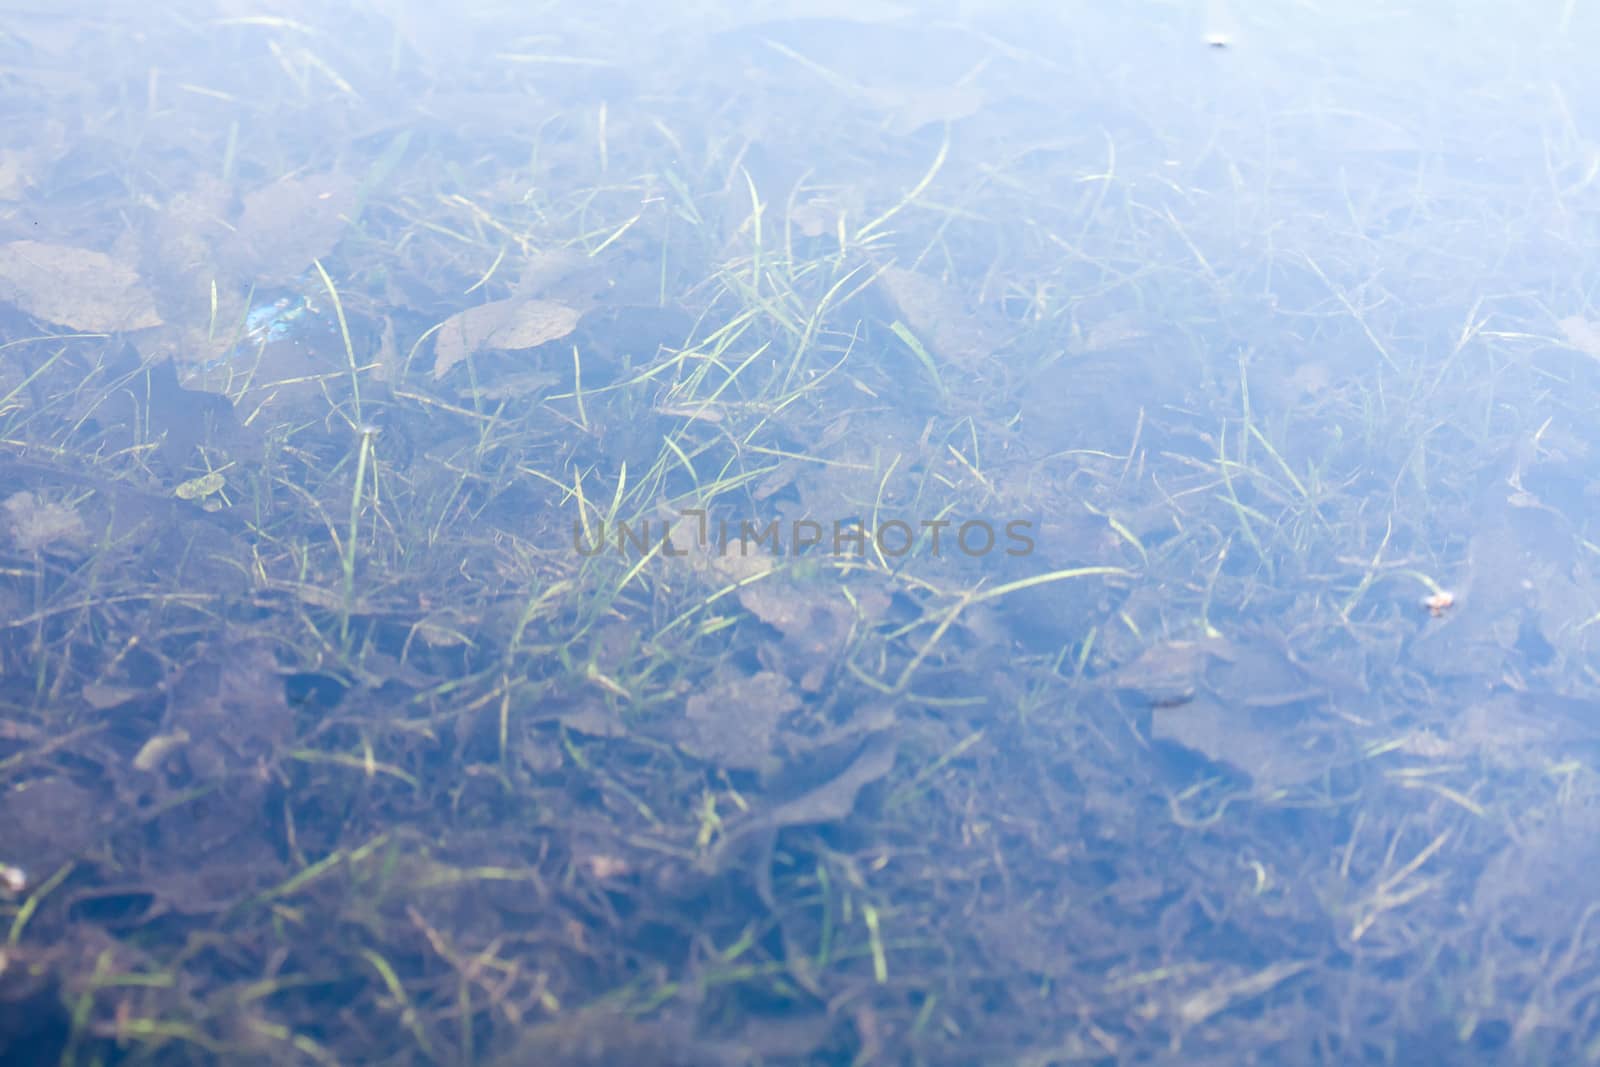 grass and plants submerged in clear water